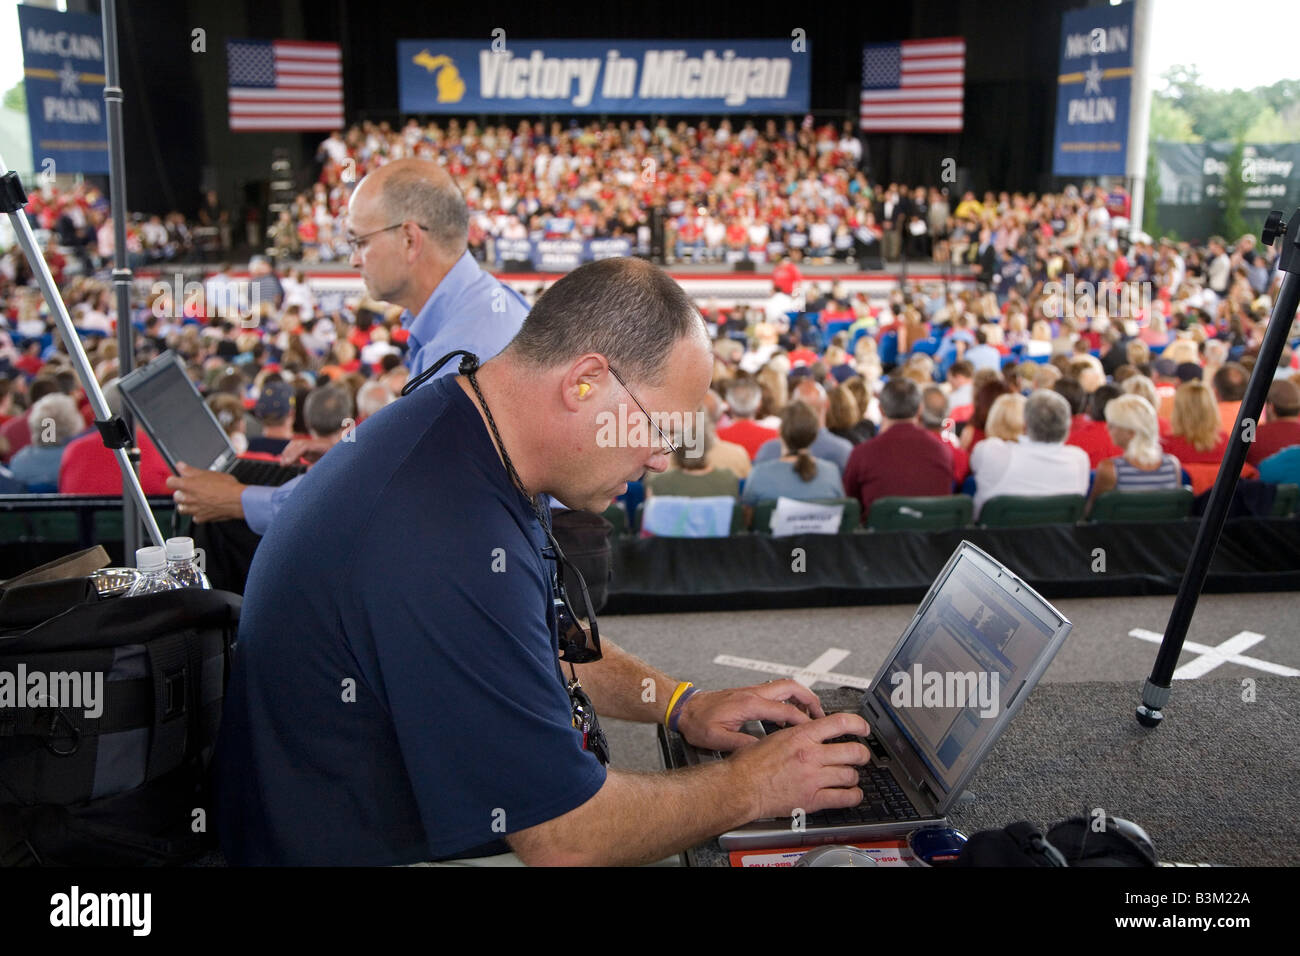 Photographers Edit Pictures on Laptop Computers During Political Campaign Rally Stock Photo